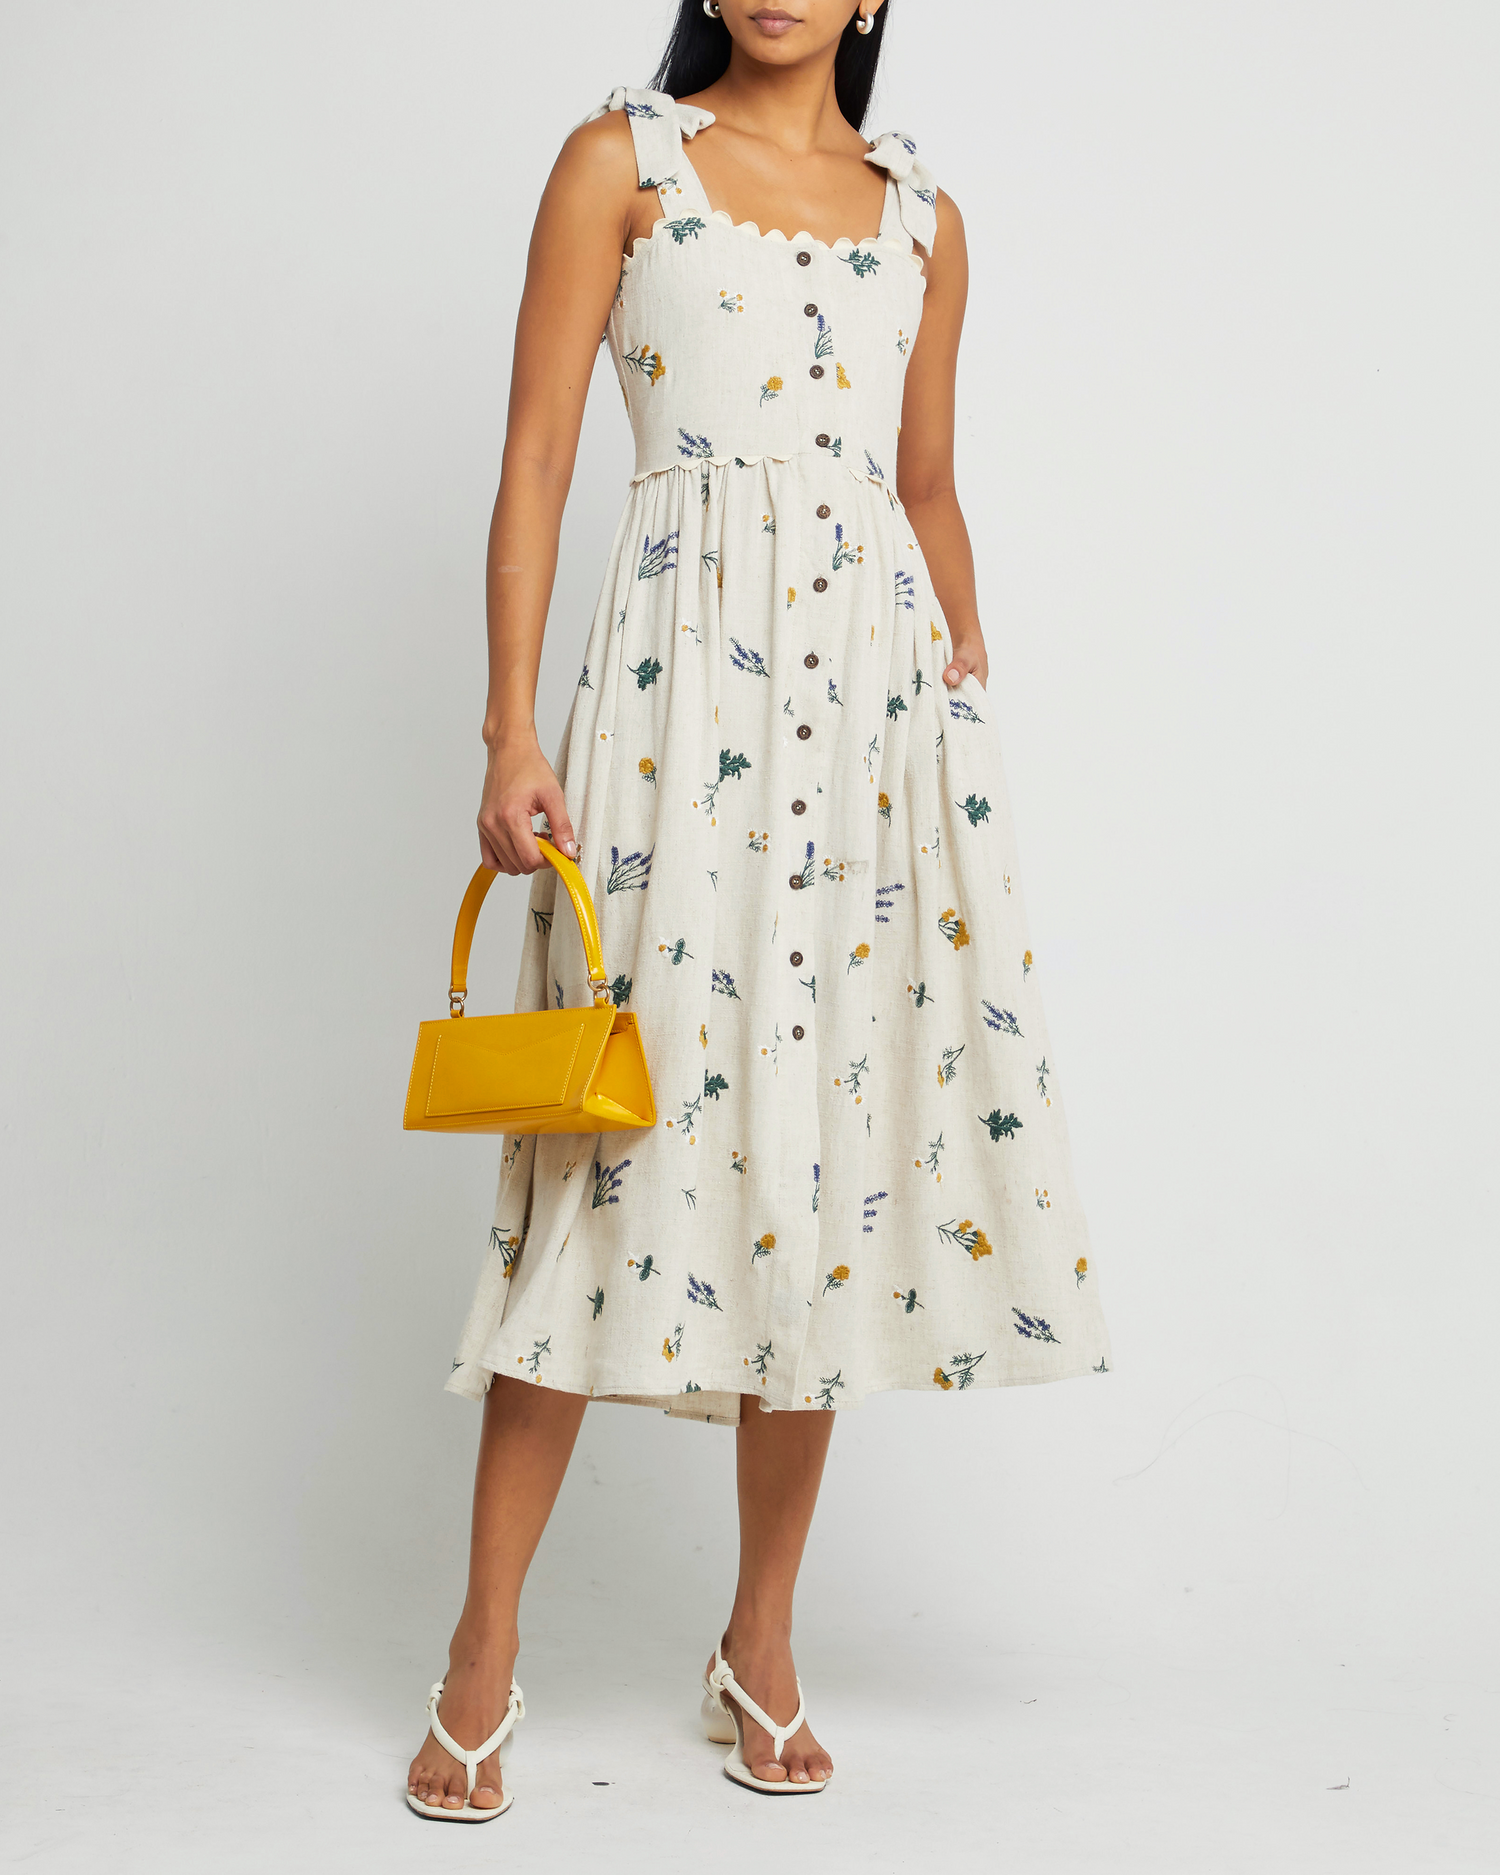 Fourth image of September Dress, a  maxi dress, linen, embroidered, fall, floral, pockets, buttons, tank